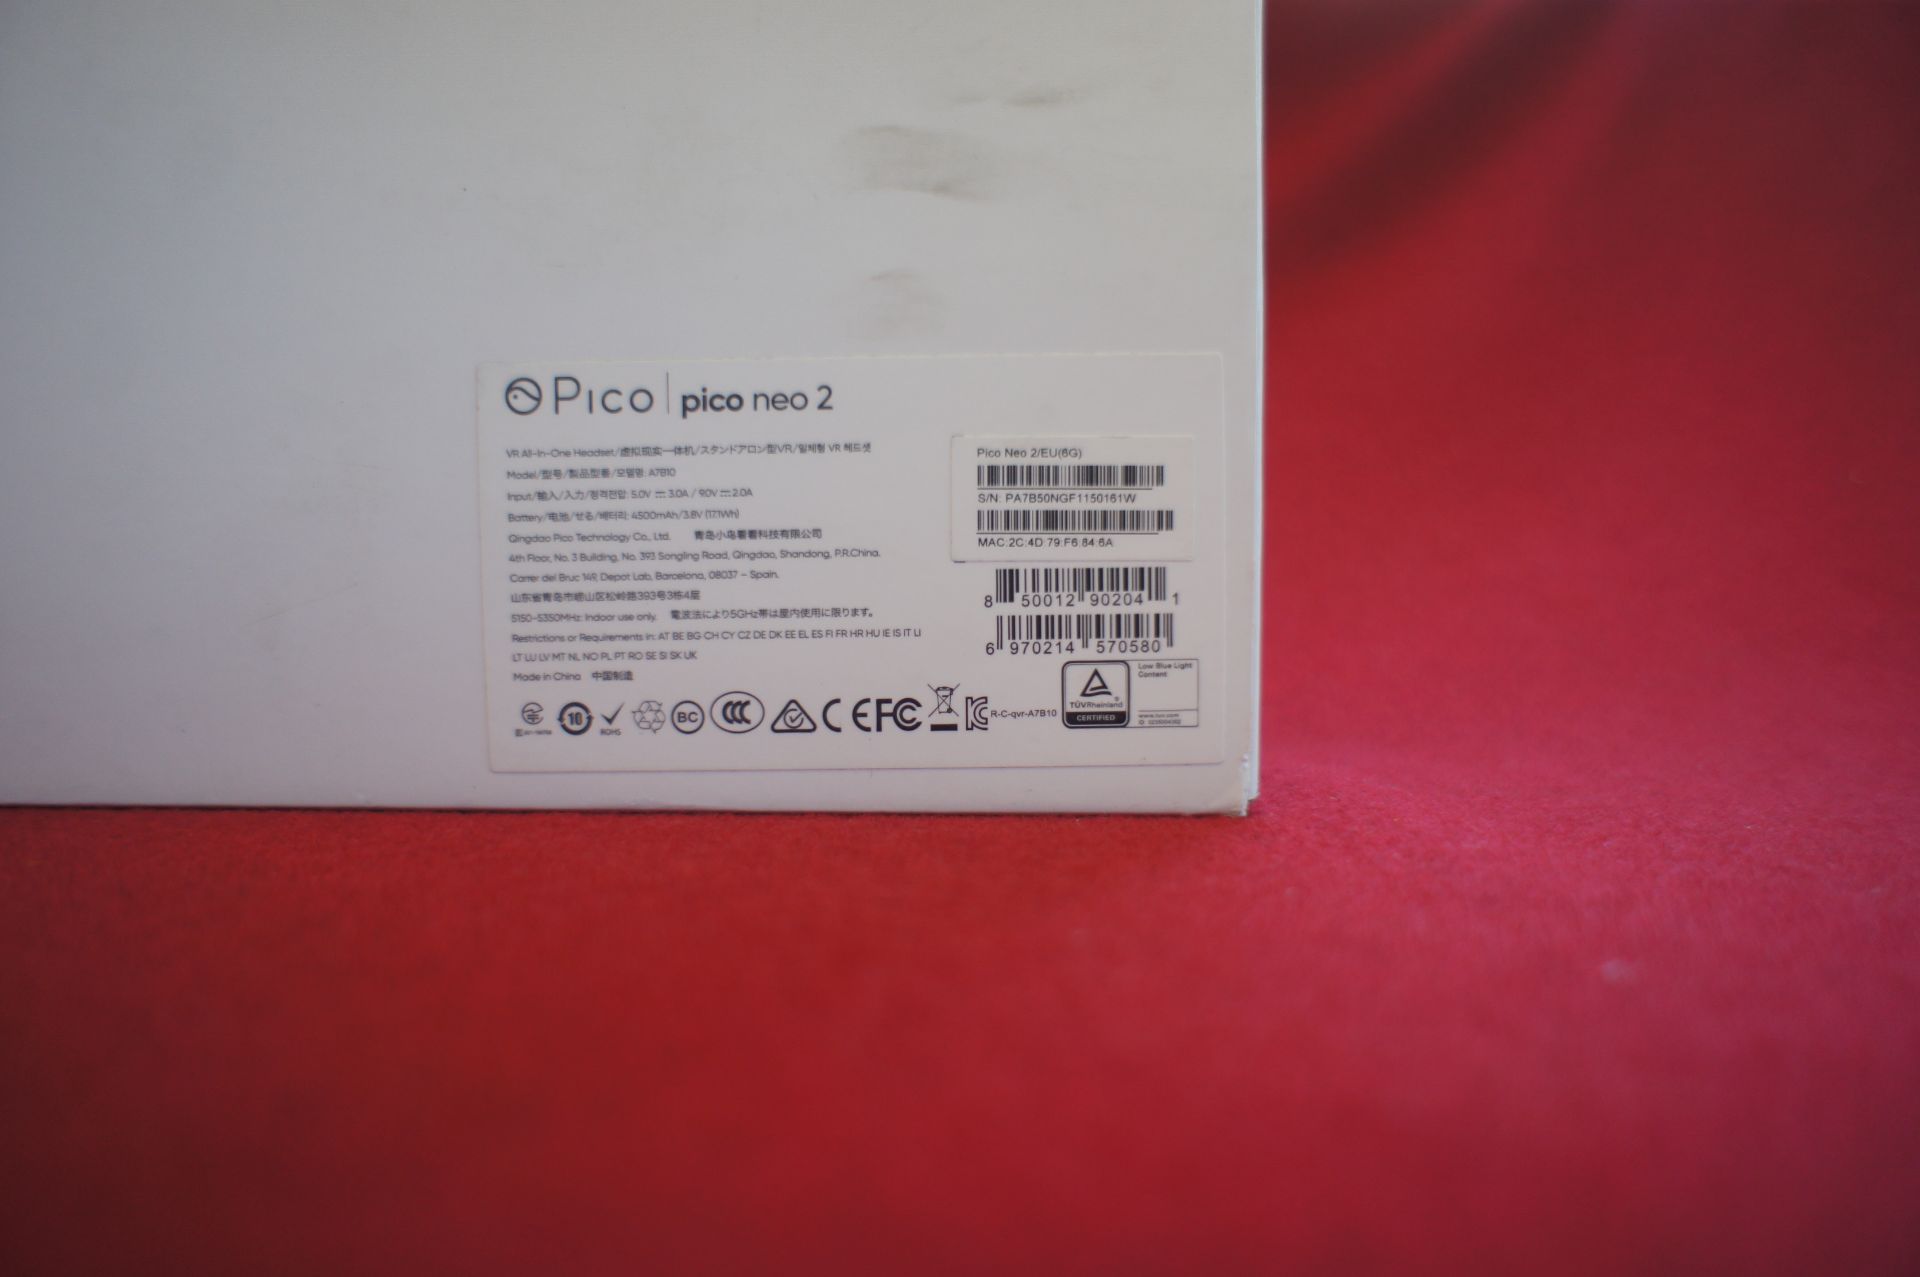 Pico Neo 2 VR headset, Asset Number B3, S/N PA7B50 - Image 2 of 3